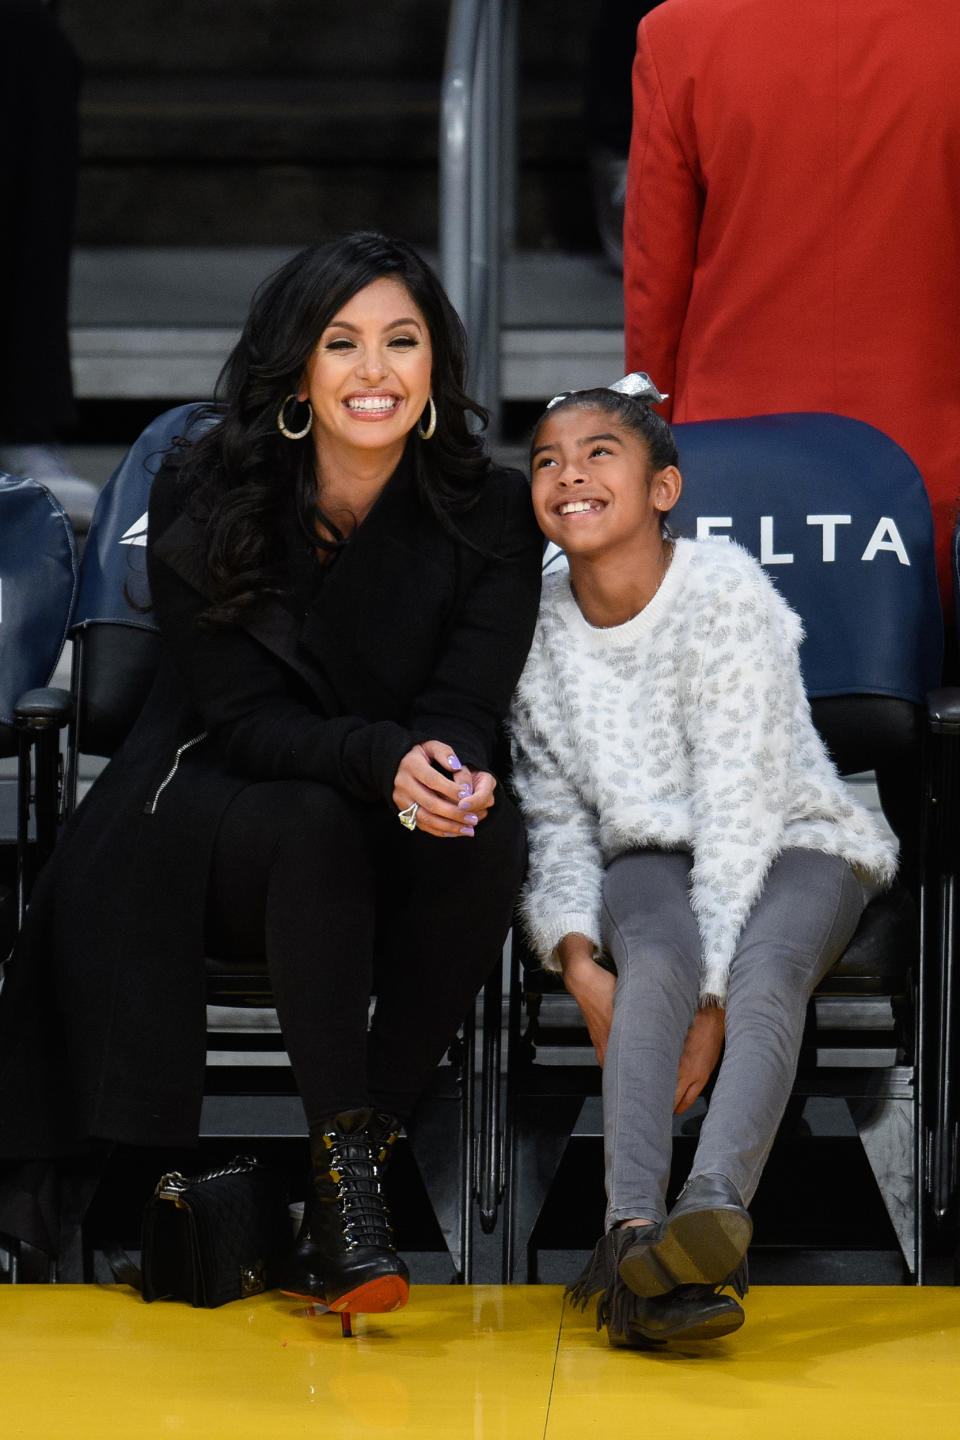 Vanessa Bryant and Gianna Maria-Onore Bryant attend a basketball game between the Indiana Pacers and the Los Angeles Lakers at Staples Center on November 29, 2015 in Los Angeles, California.   (Noel Vasquez / GC Images)